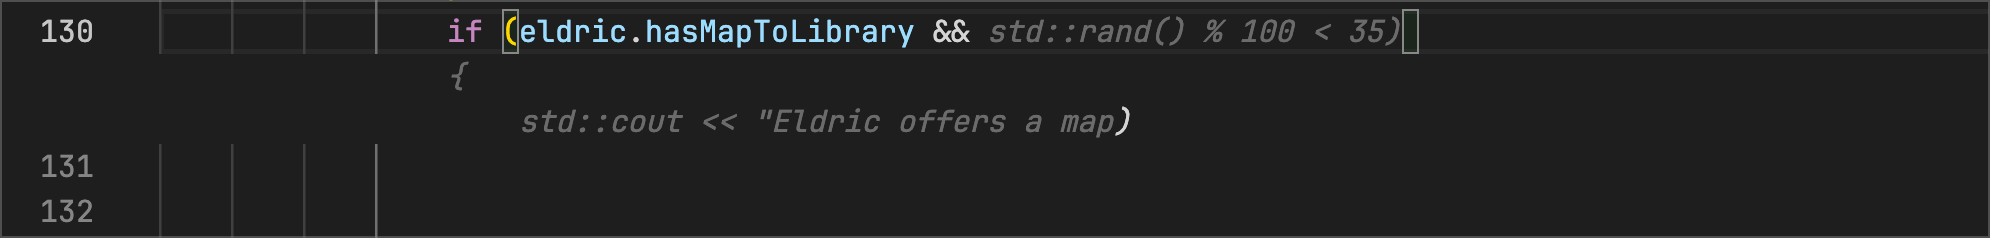 adventure.cpp - Code Suggestions suggests giving the map if incorrect